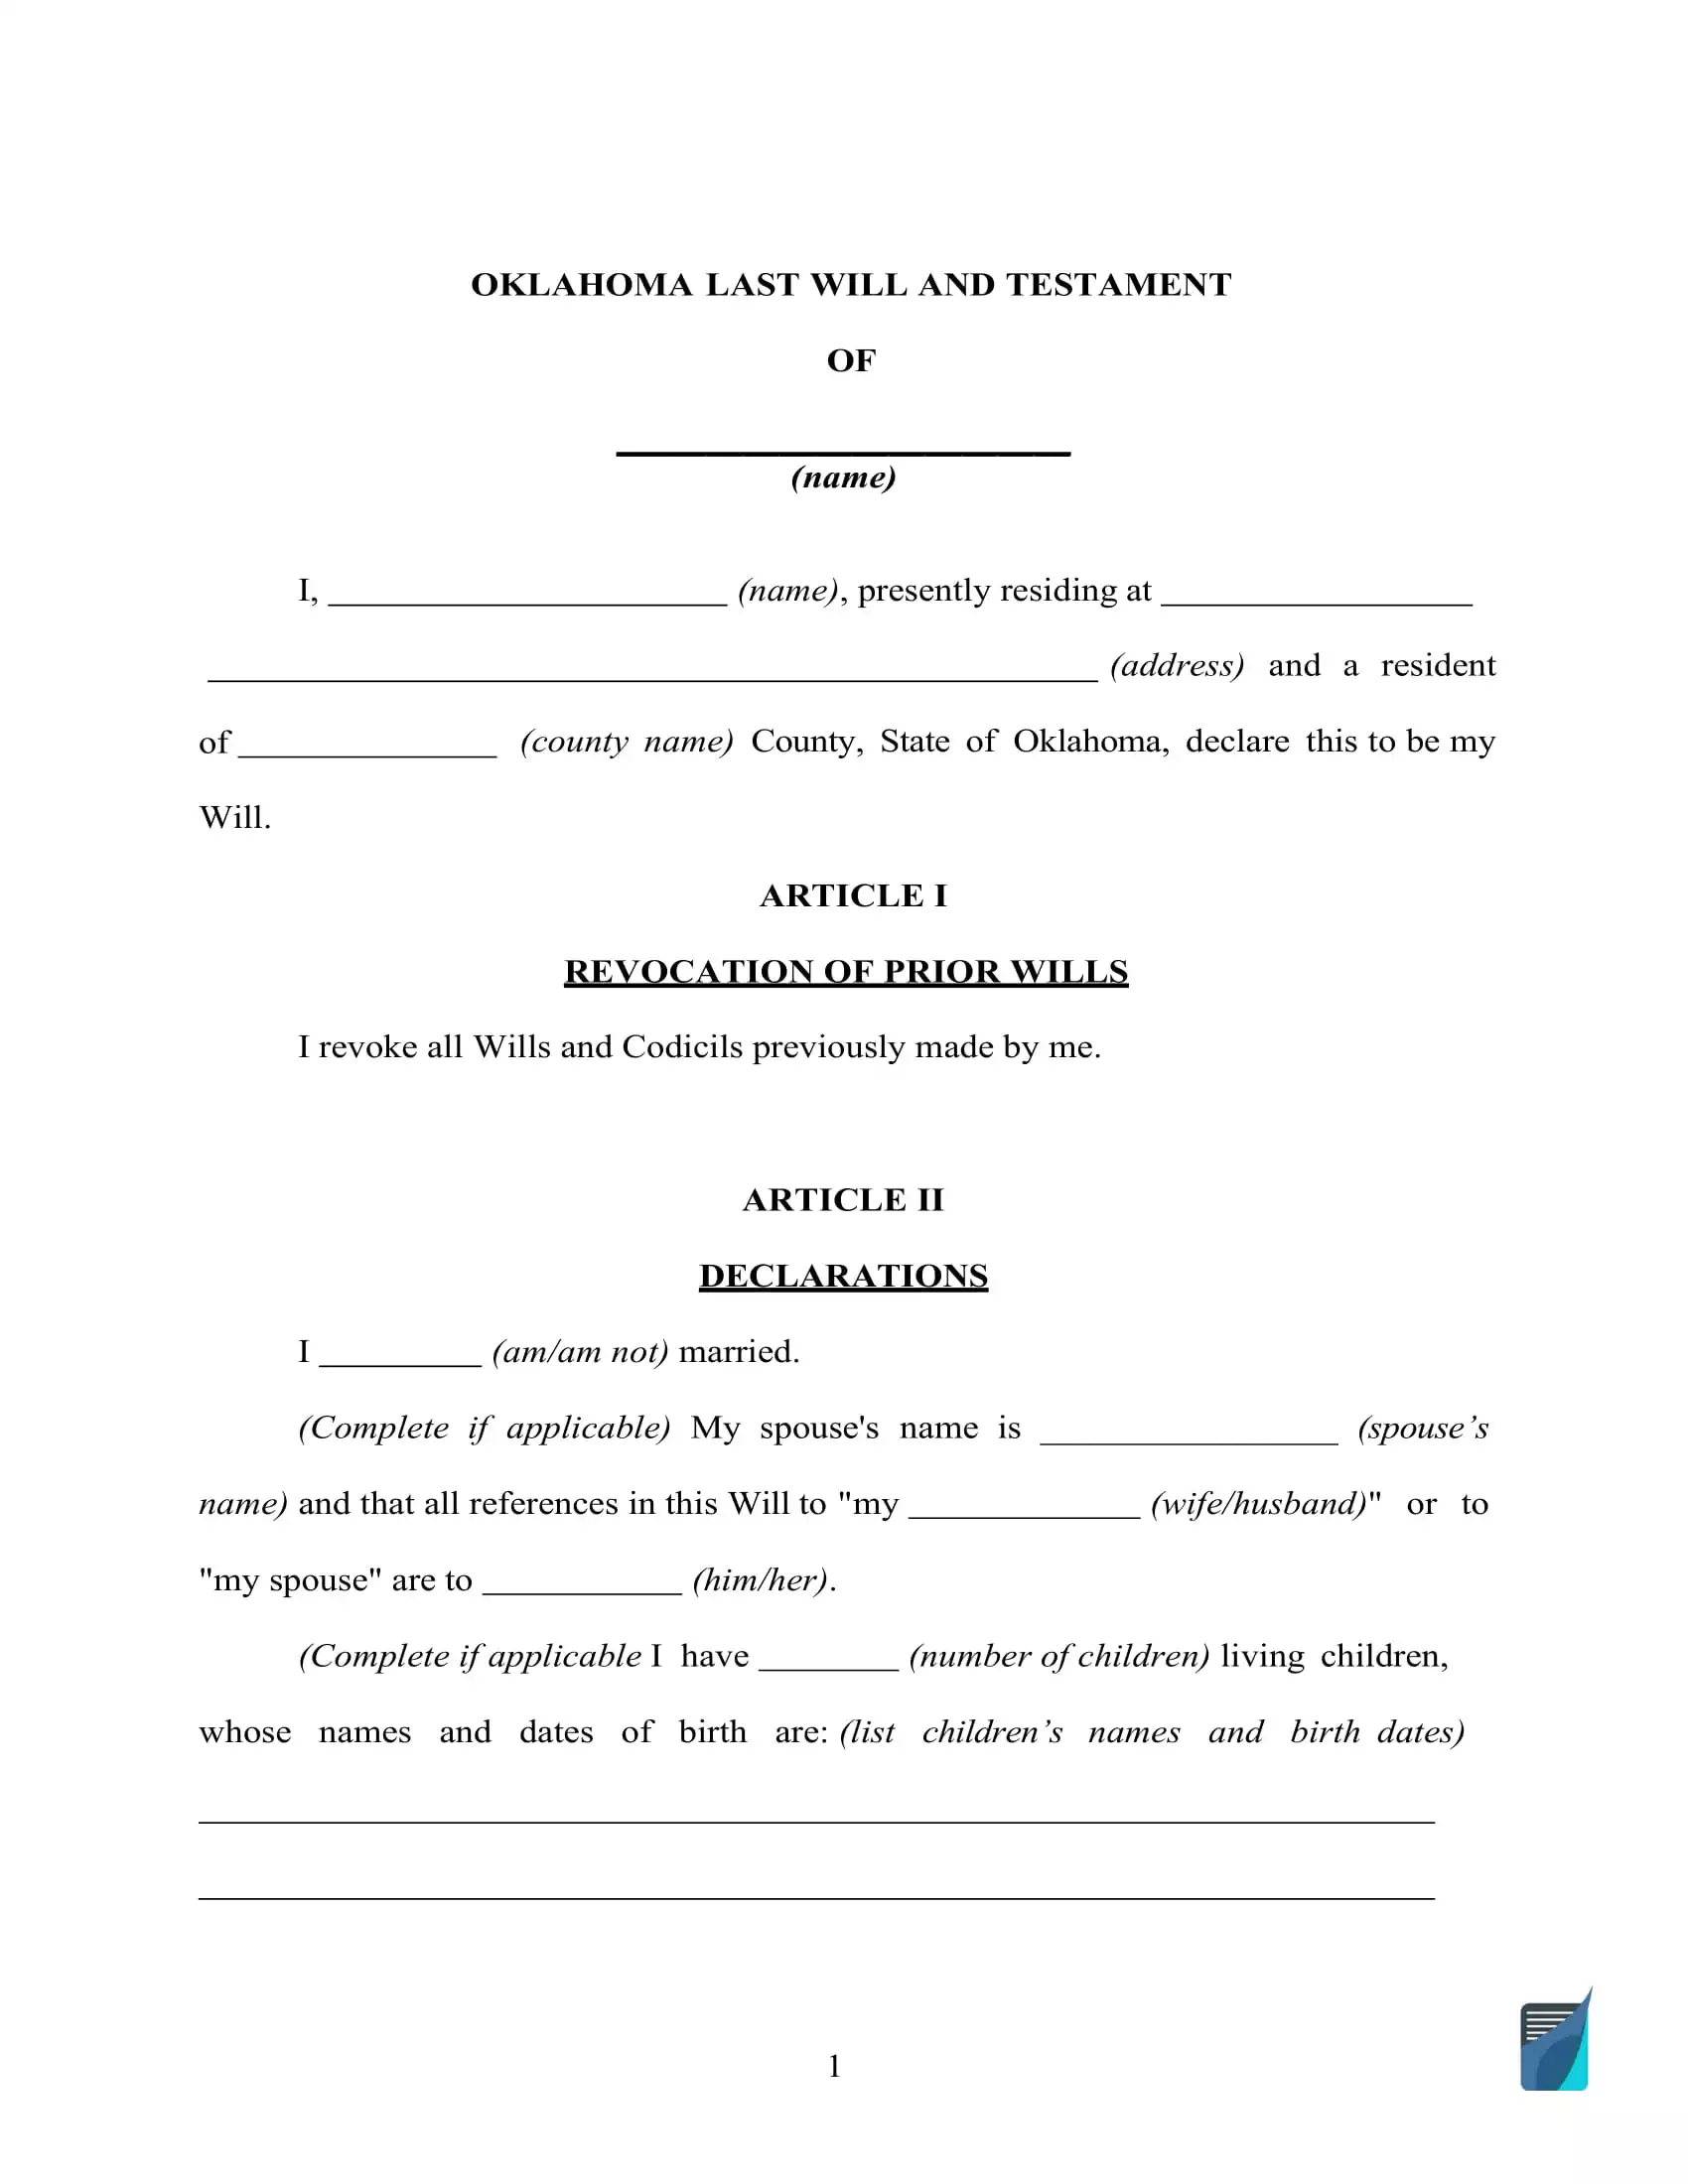 oklahoma-last-will-and-testament-template